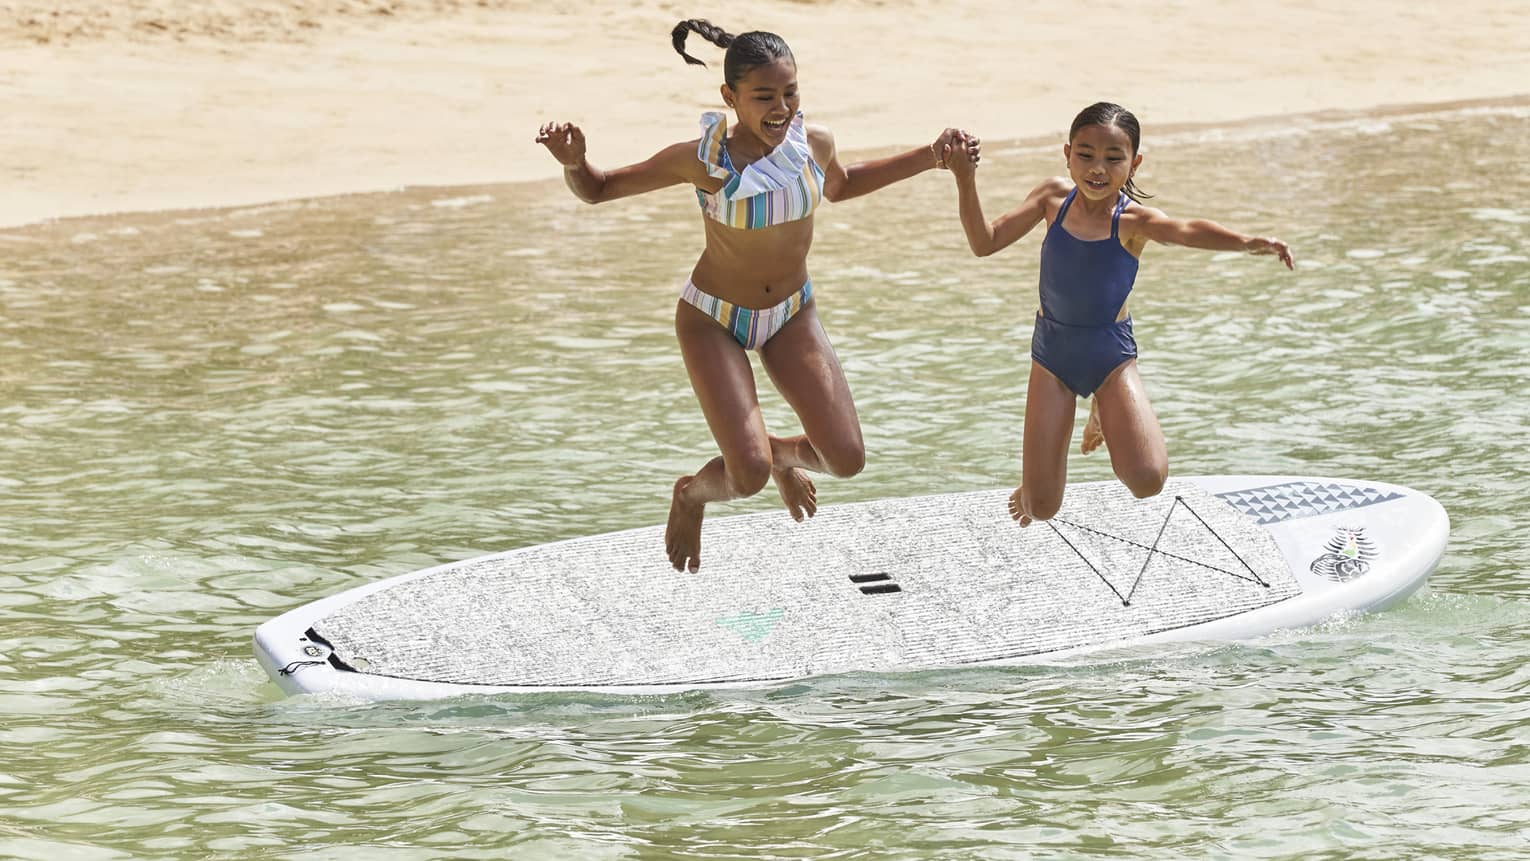 Two young girls jump hand-in-hand into the water from a stand-up paddleboard